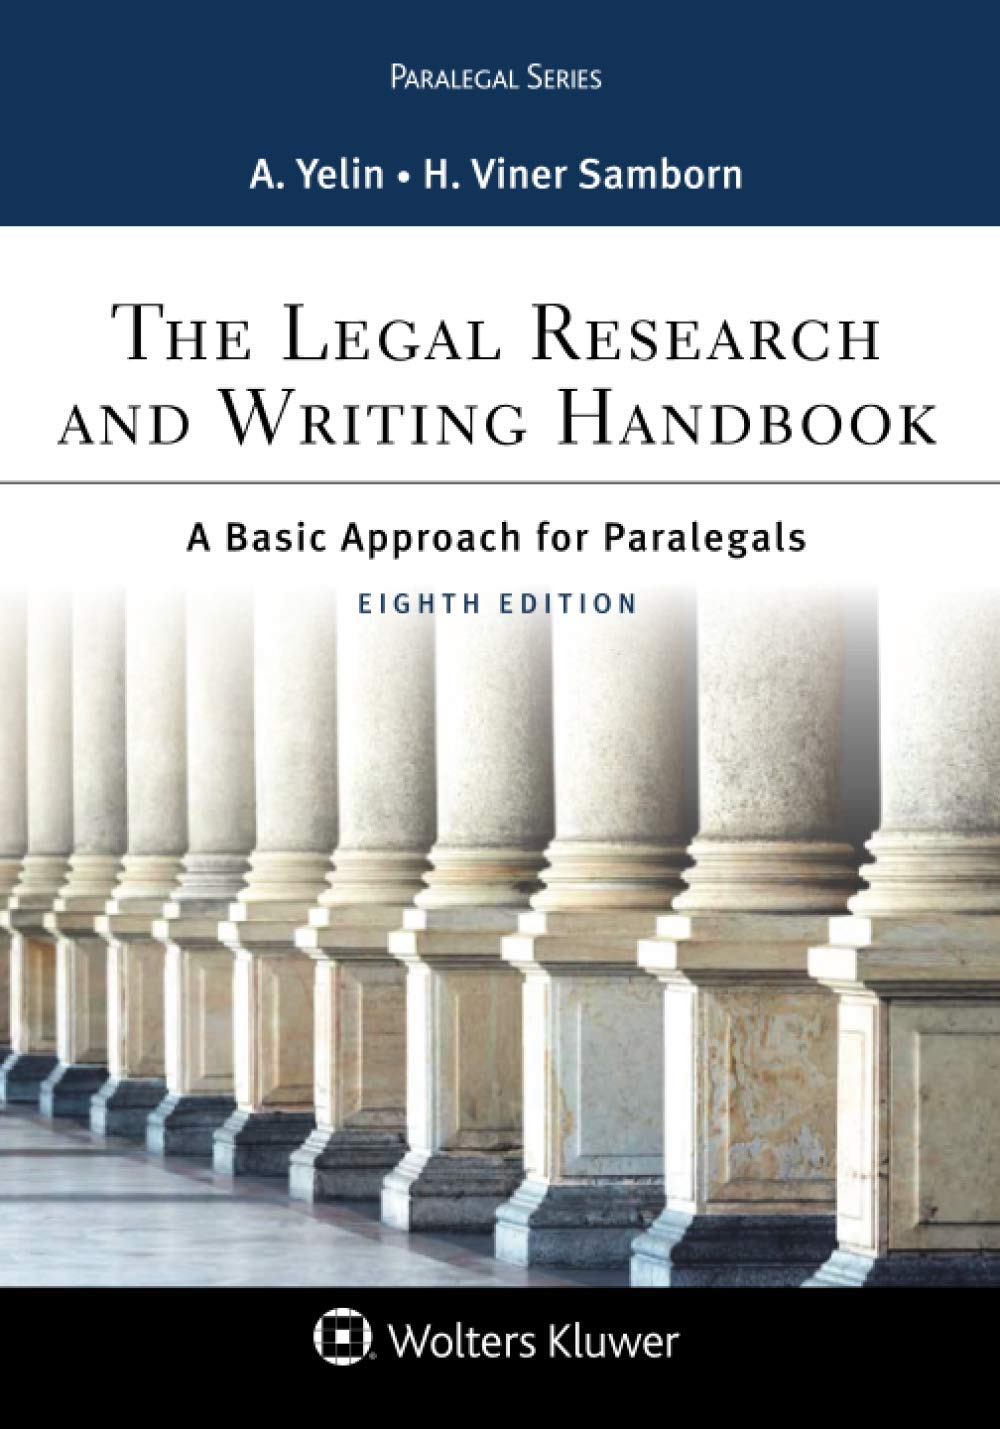 The Legal Research and Writing Handbook: A Basic Approach for Paralegals (Aspen Paralegal Series)